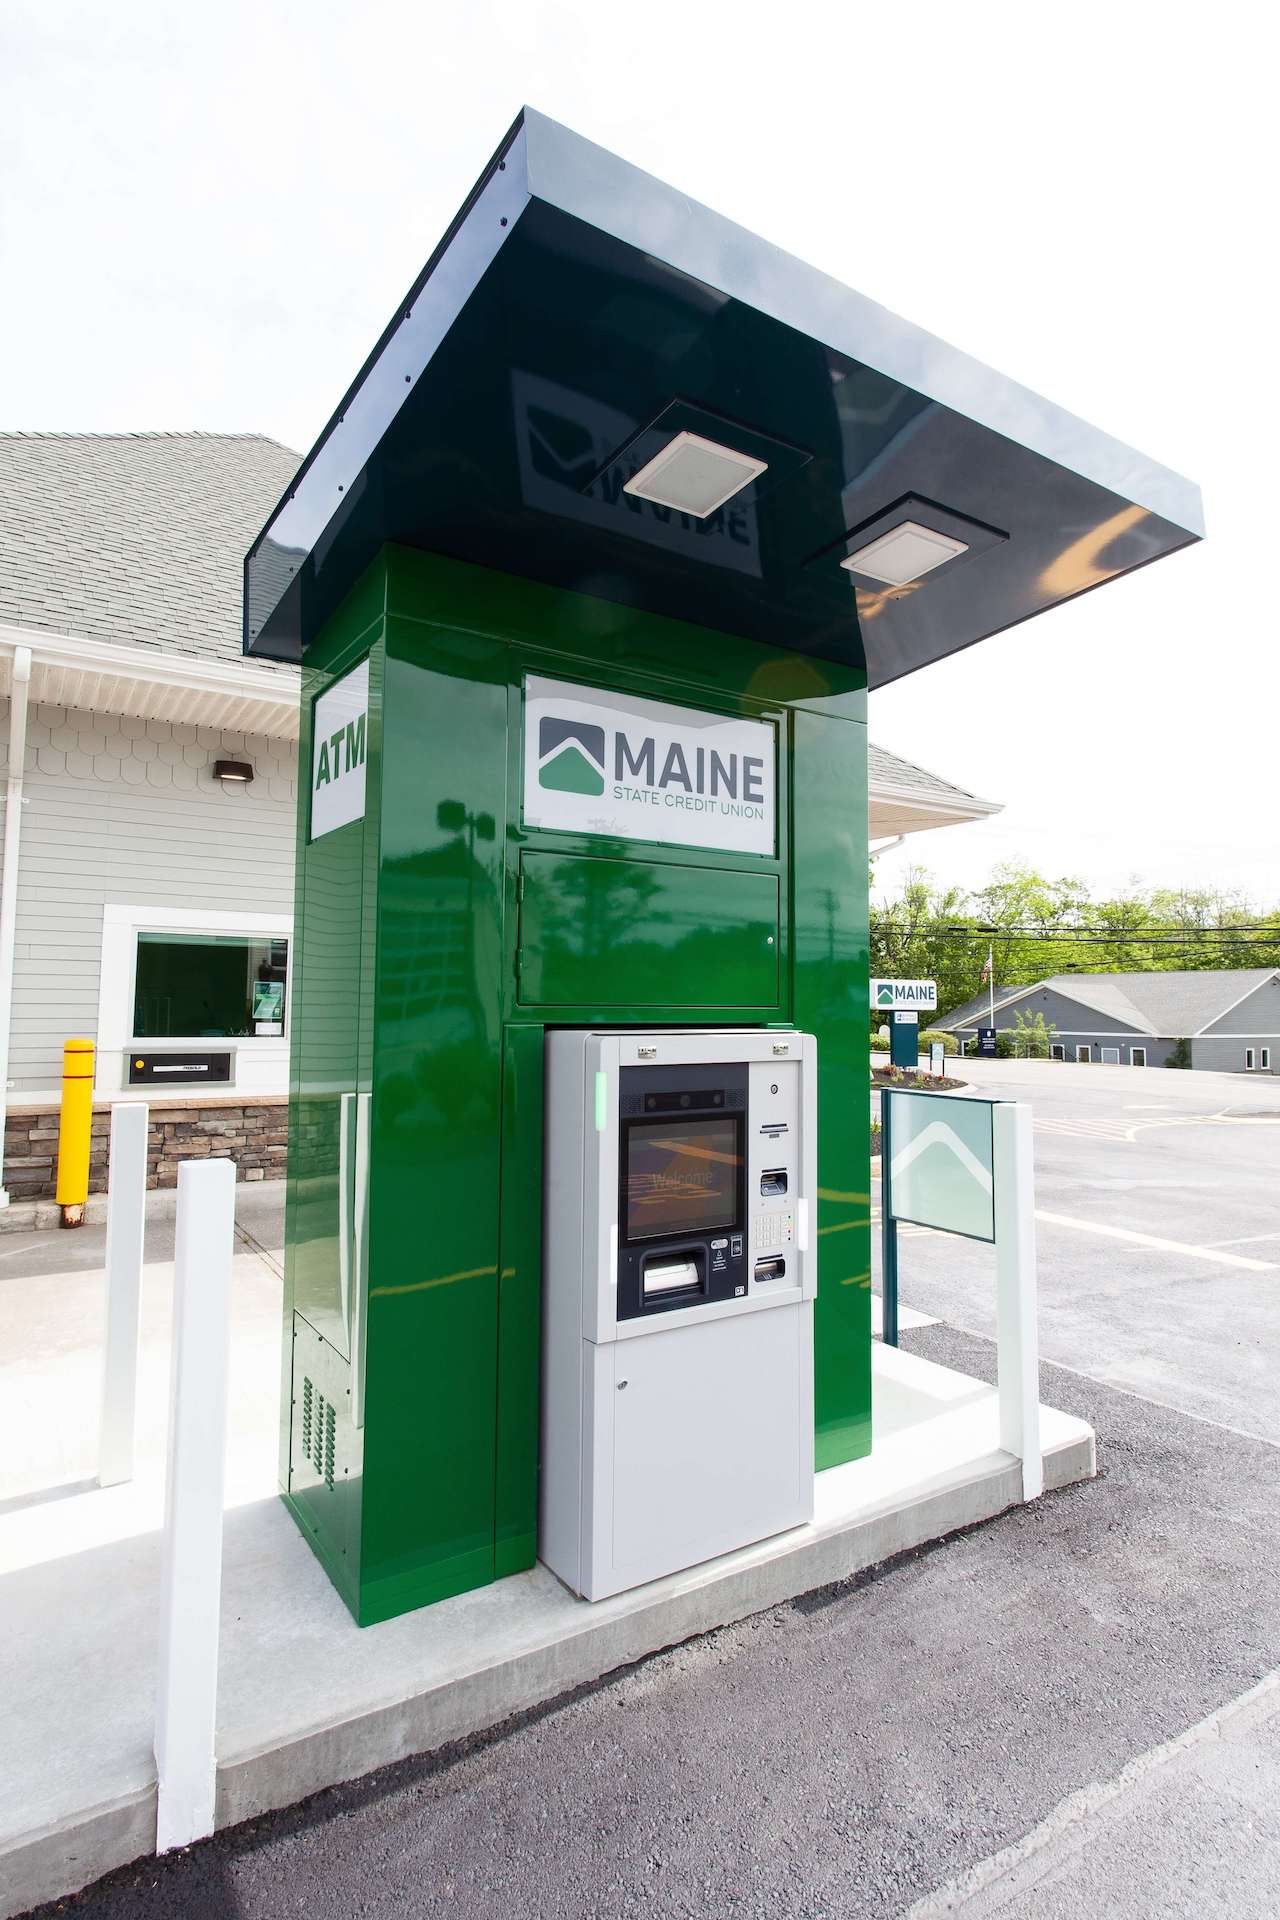 A drive-up ATM kiosk for Maine State Credit Union, painted green with the logo on top, under a protective overhang.